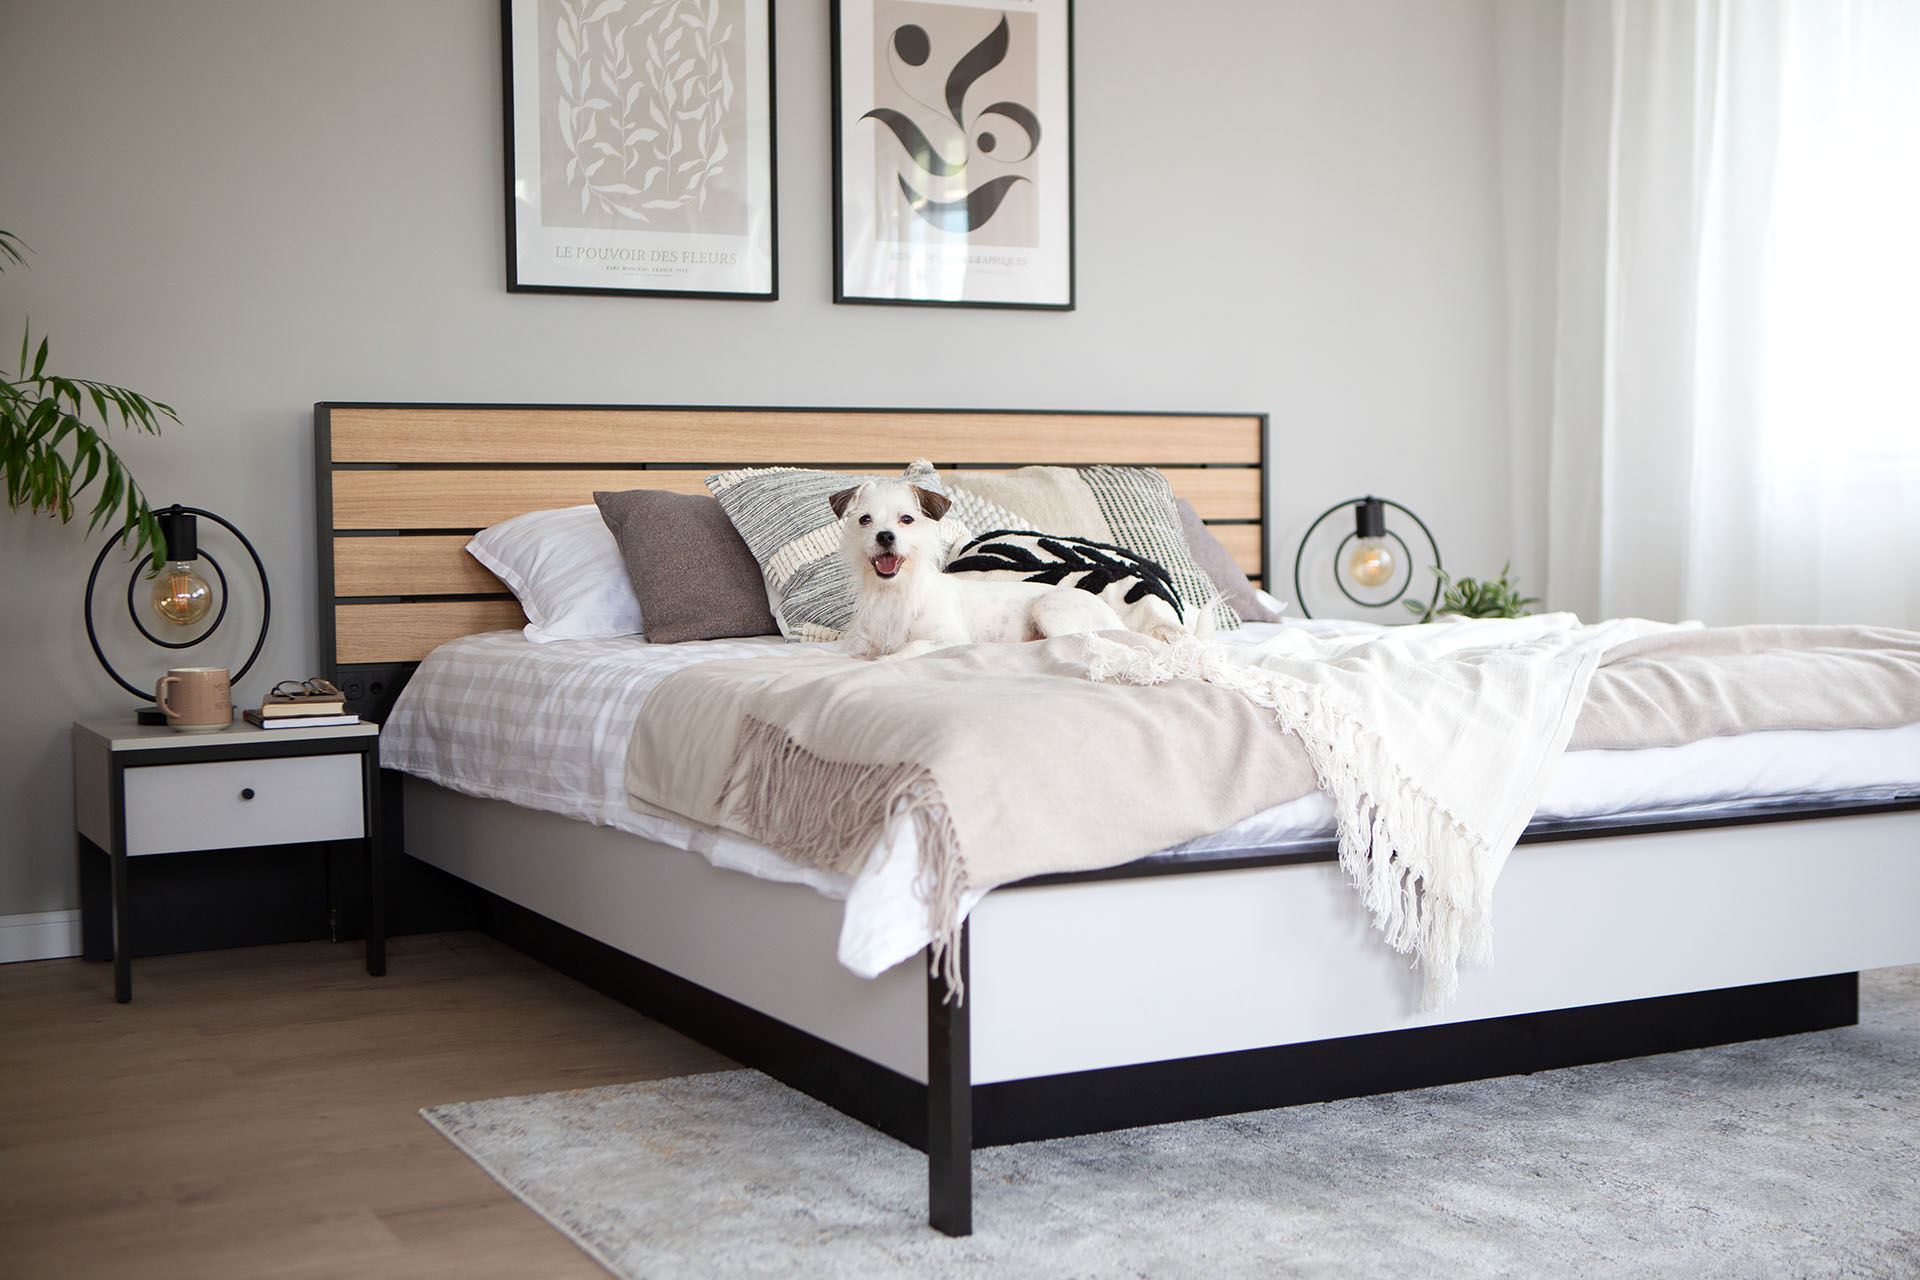 Choosing the Perfect Nightstand for Your Bedroom: A Practical Guide - get inspired by Smart Furniture online store